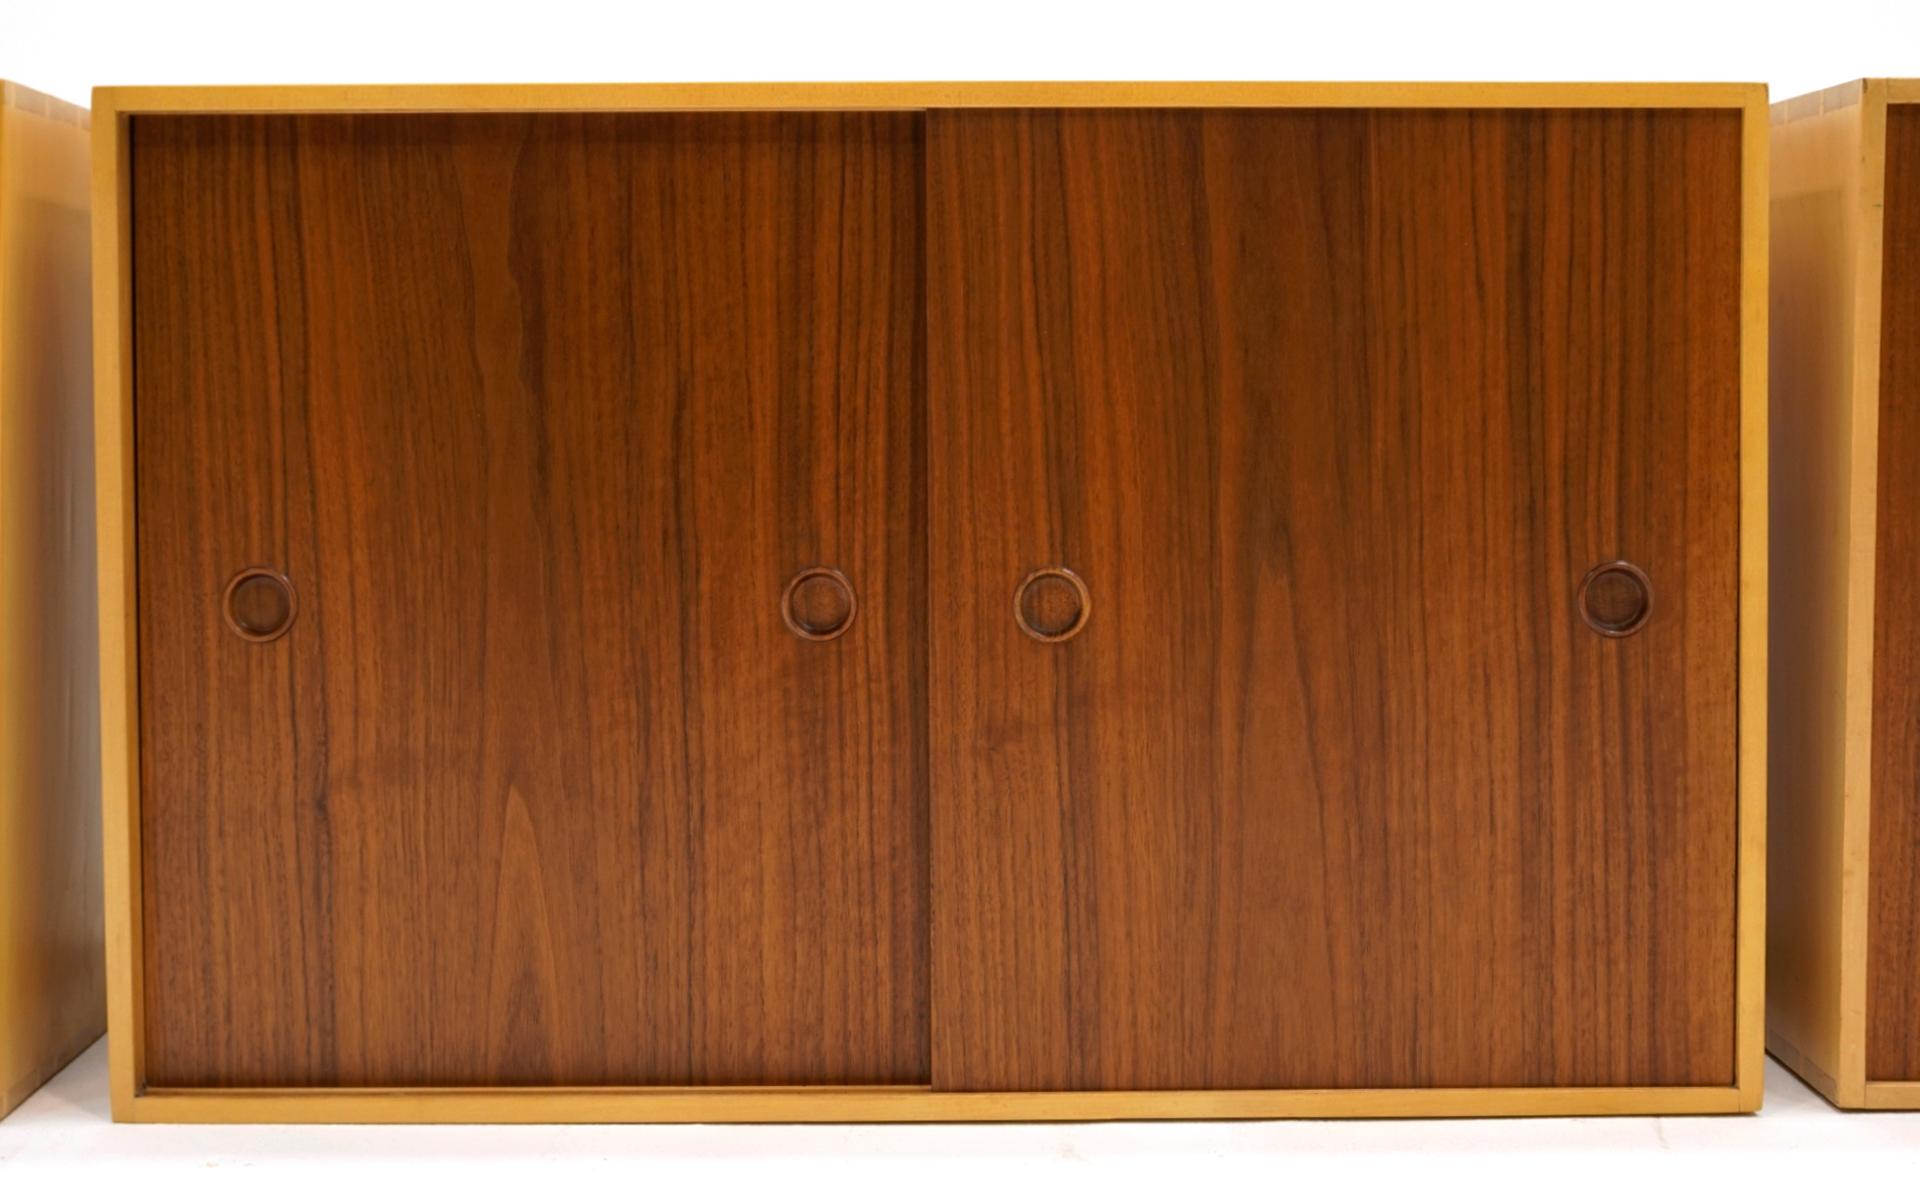 Wall Mounted Cabinets by Finn Juhl for Baker, Walnut and Birch, Great Condition For Sale 5